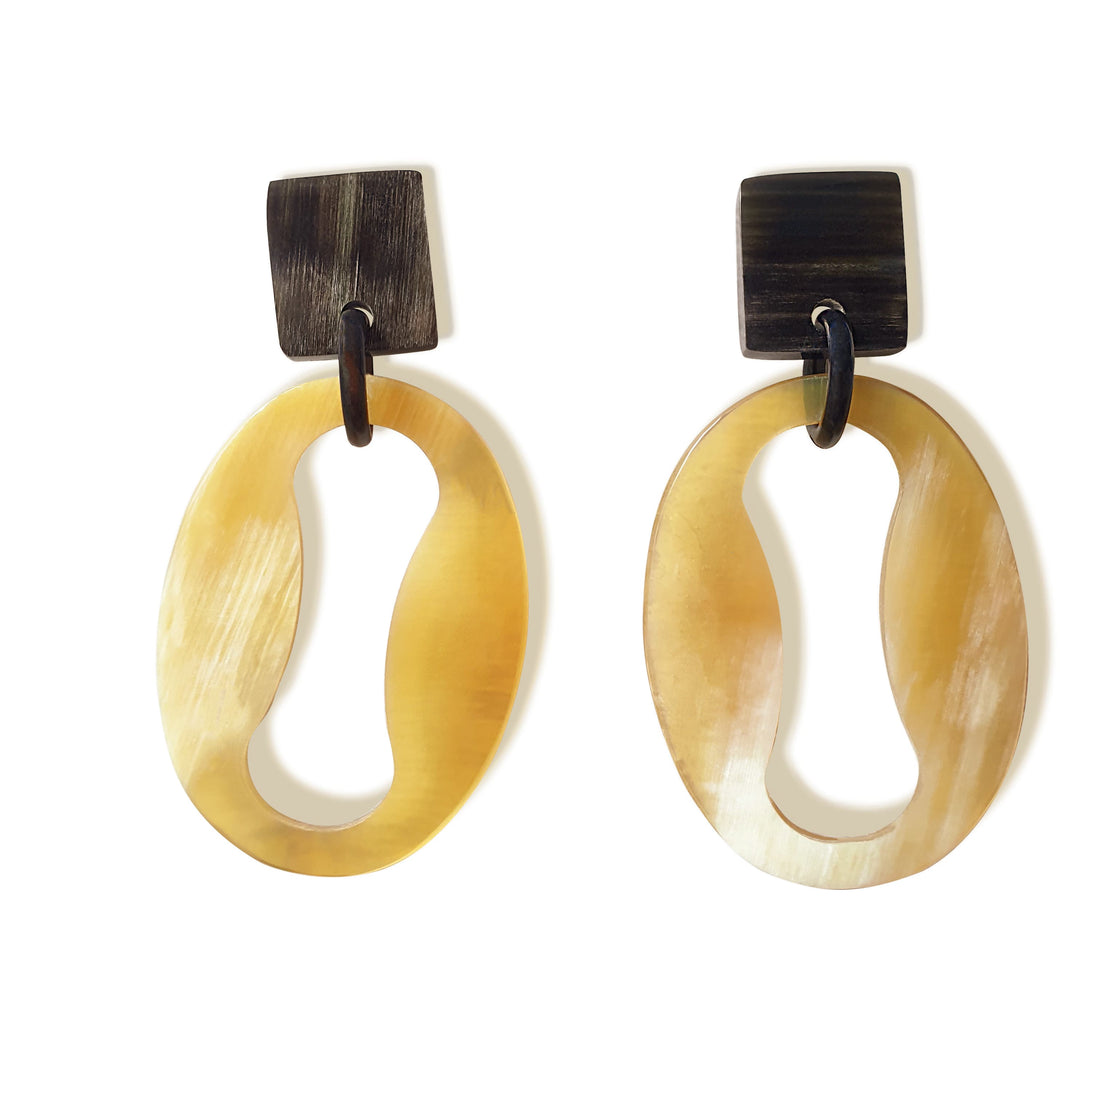 Handmade drop earrings are shaped by a mix of an oval and an infinity symbol featured light colors in the natural light